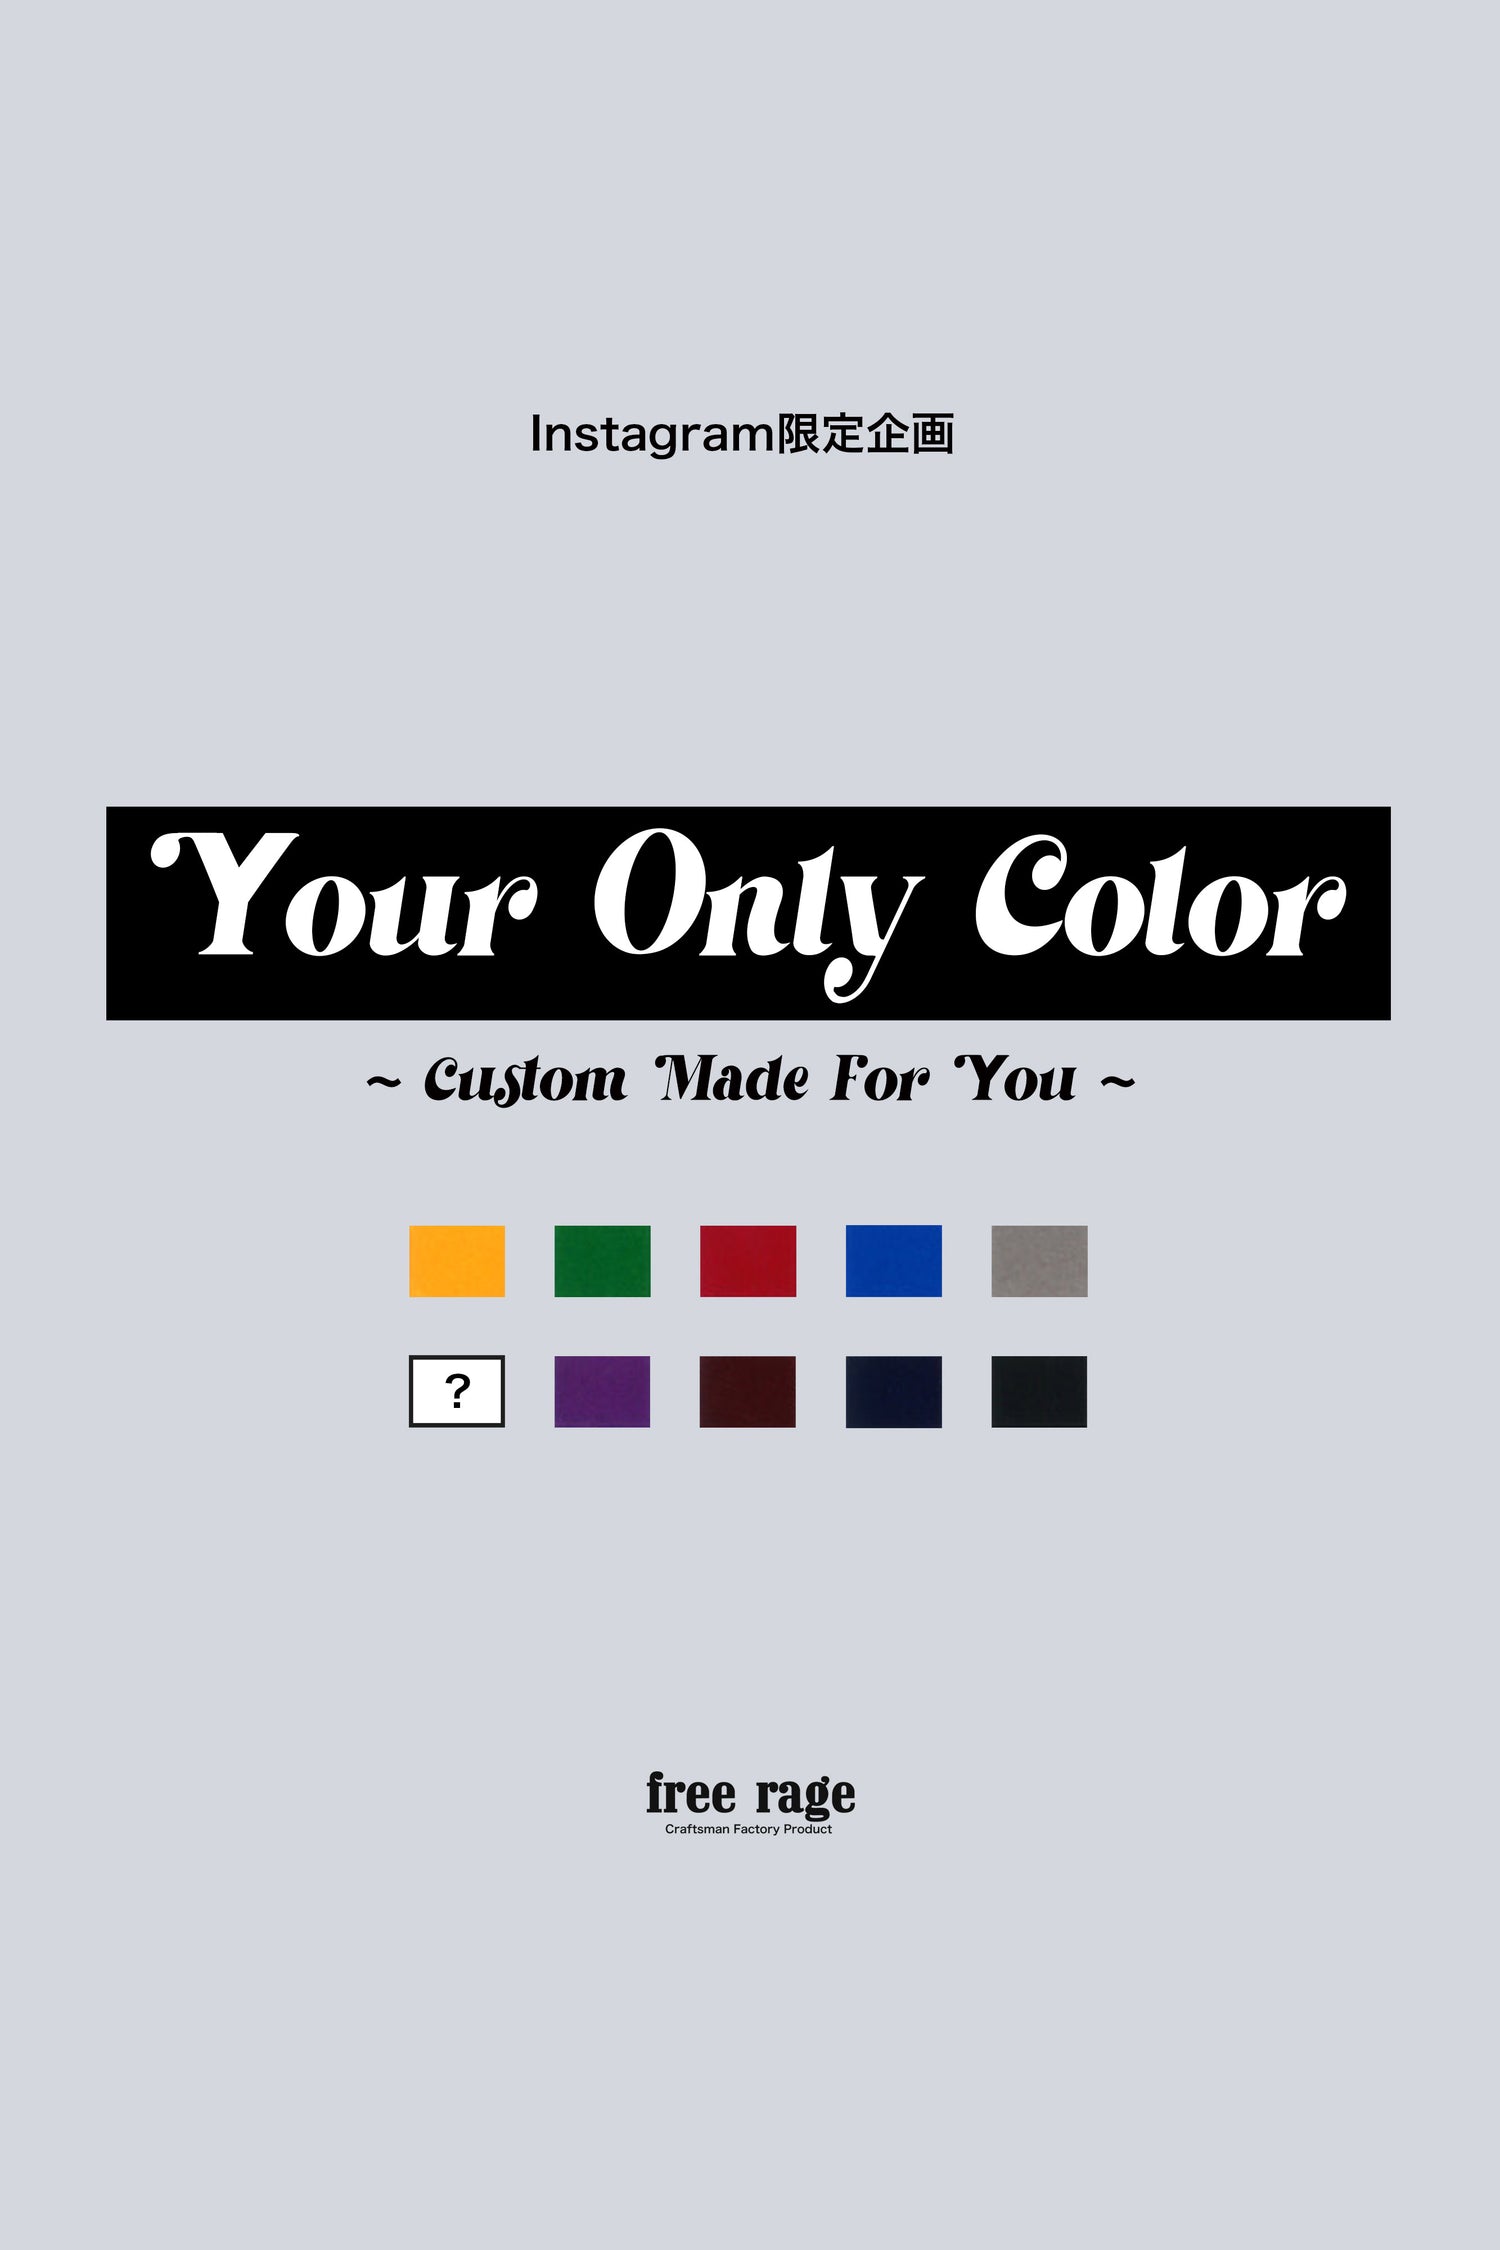 Instagram限定企画  「Your Only Color」